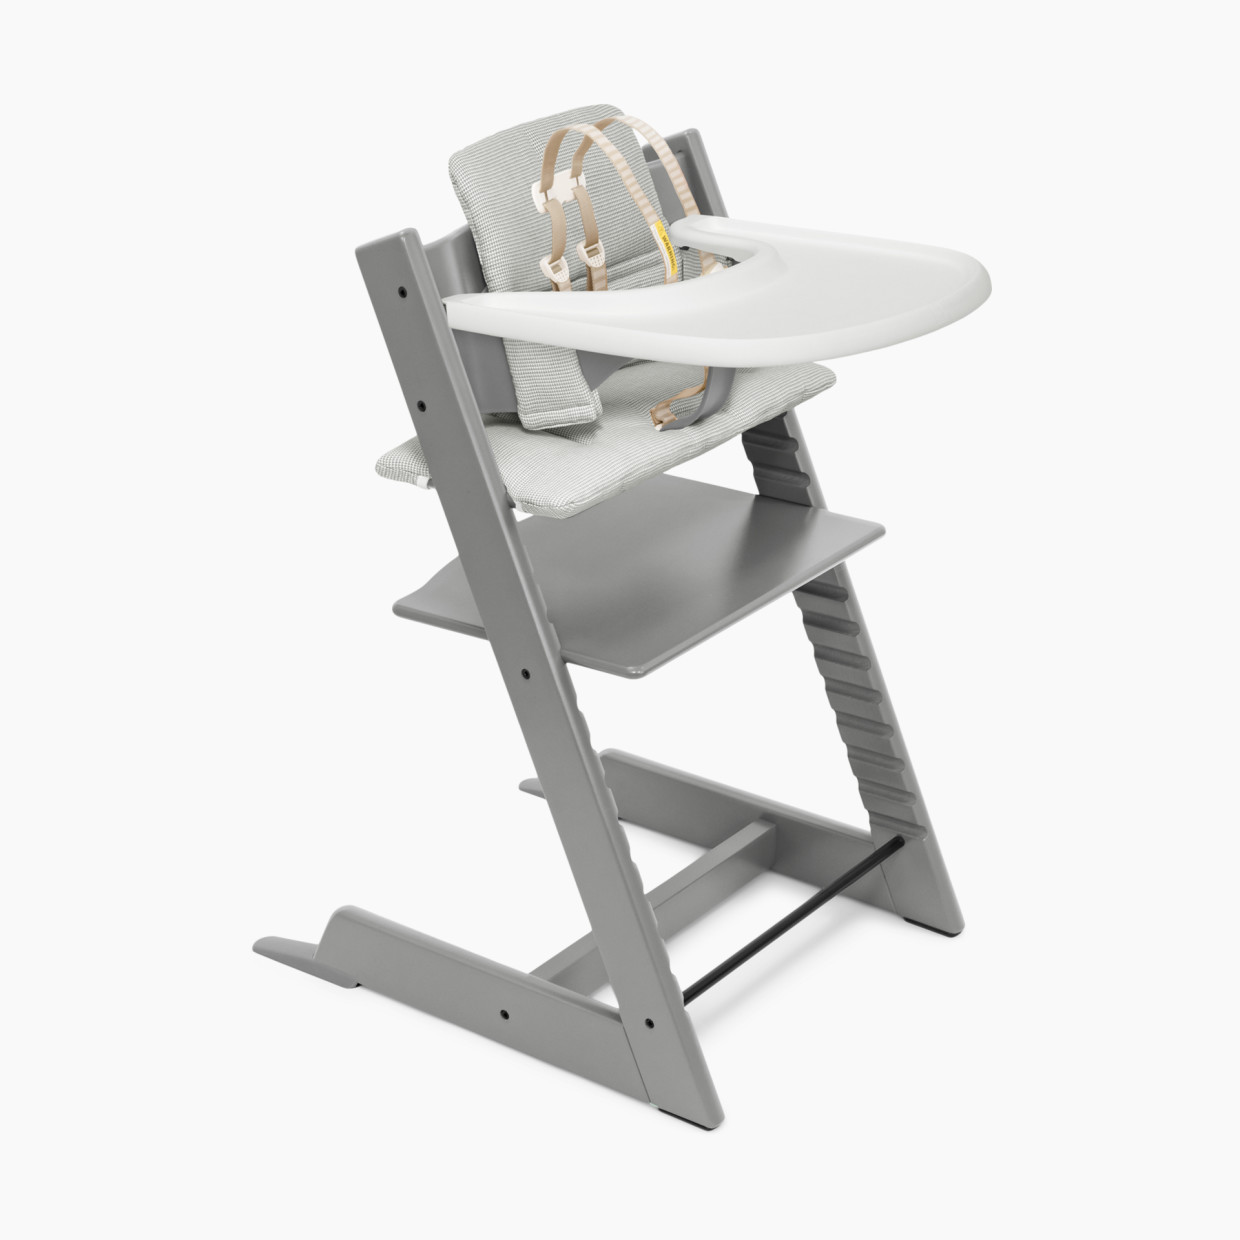 Stokke Tripp Trapp High Chair Complete - Storm Grey/Nordic Cushion/White Tray.